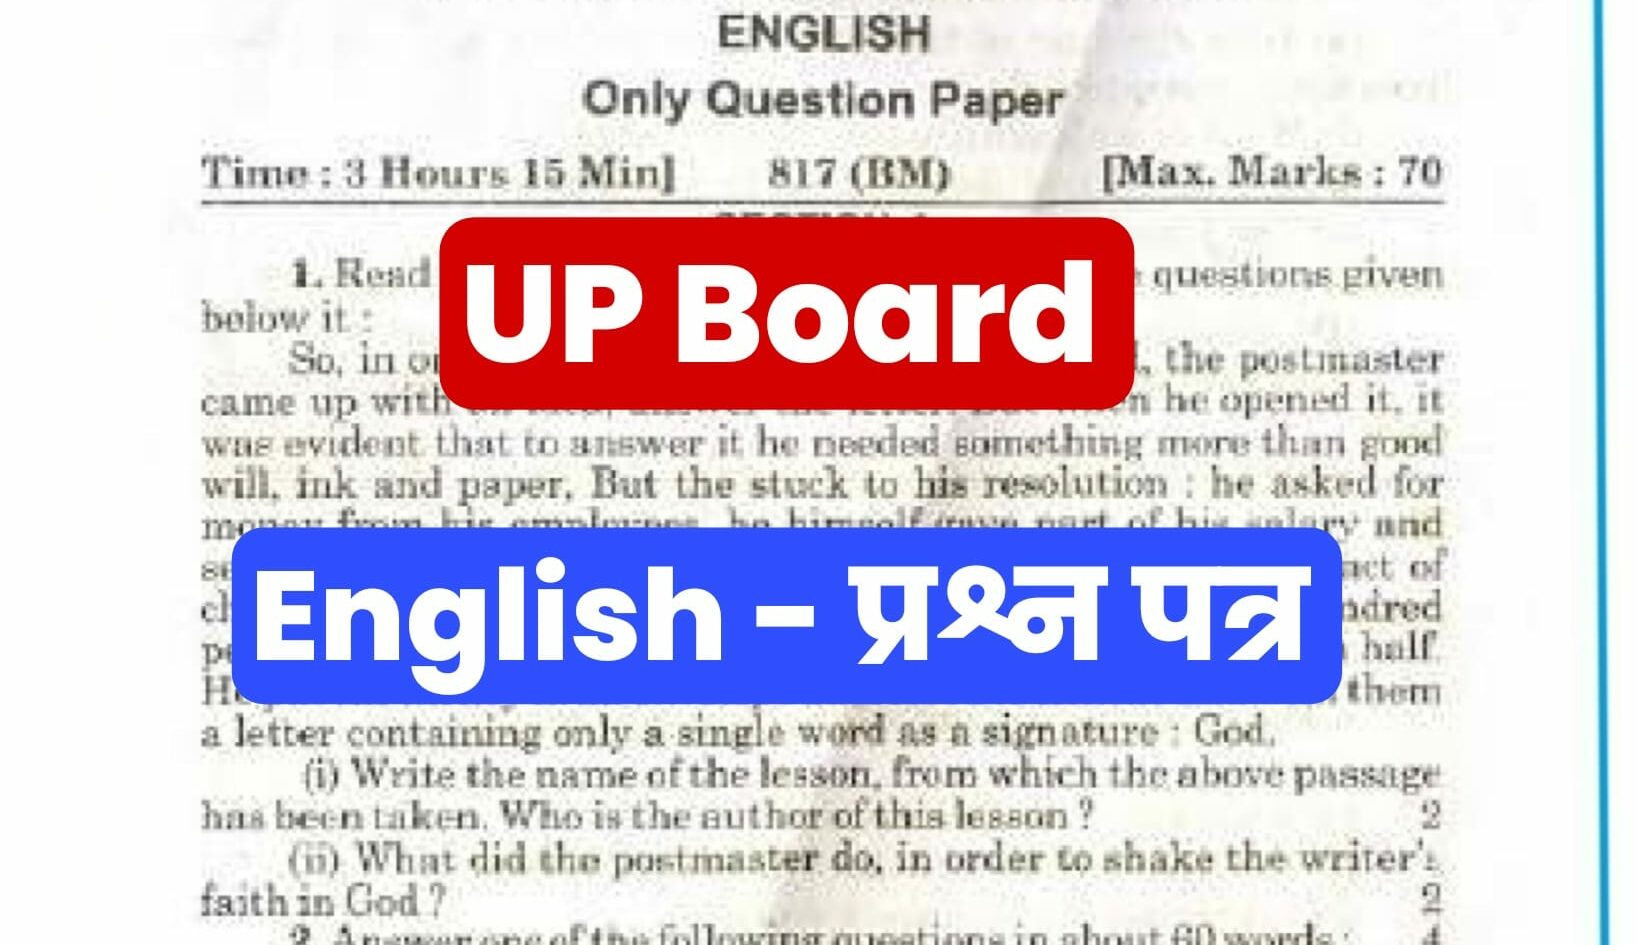 UP Board High School English Previous Year Paper